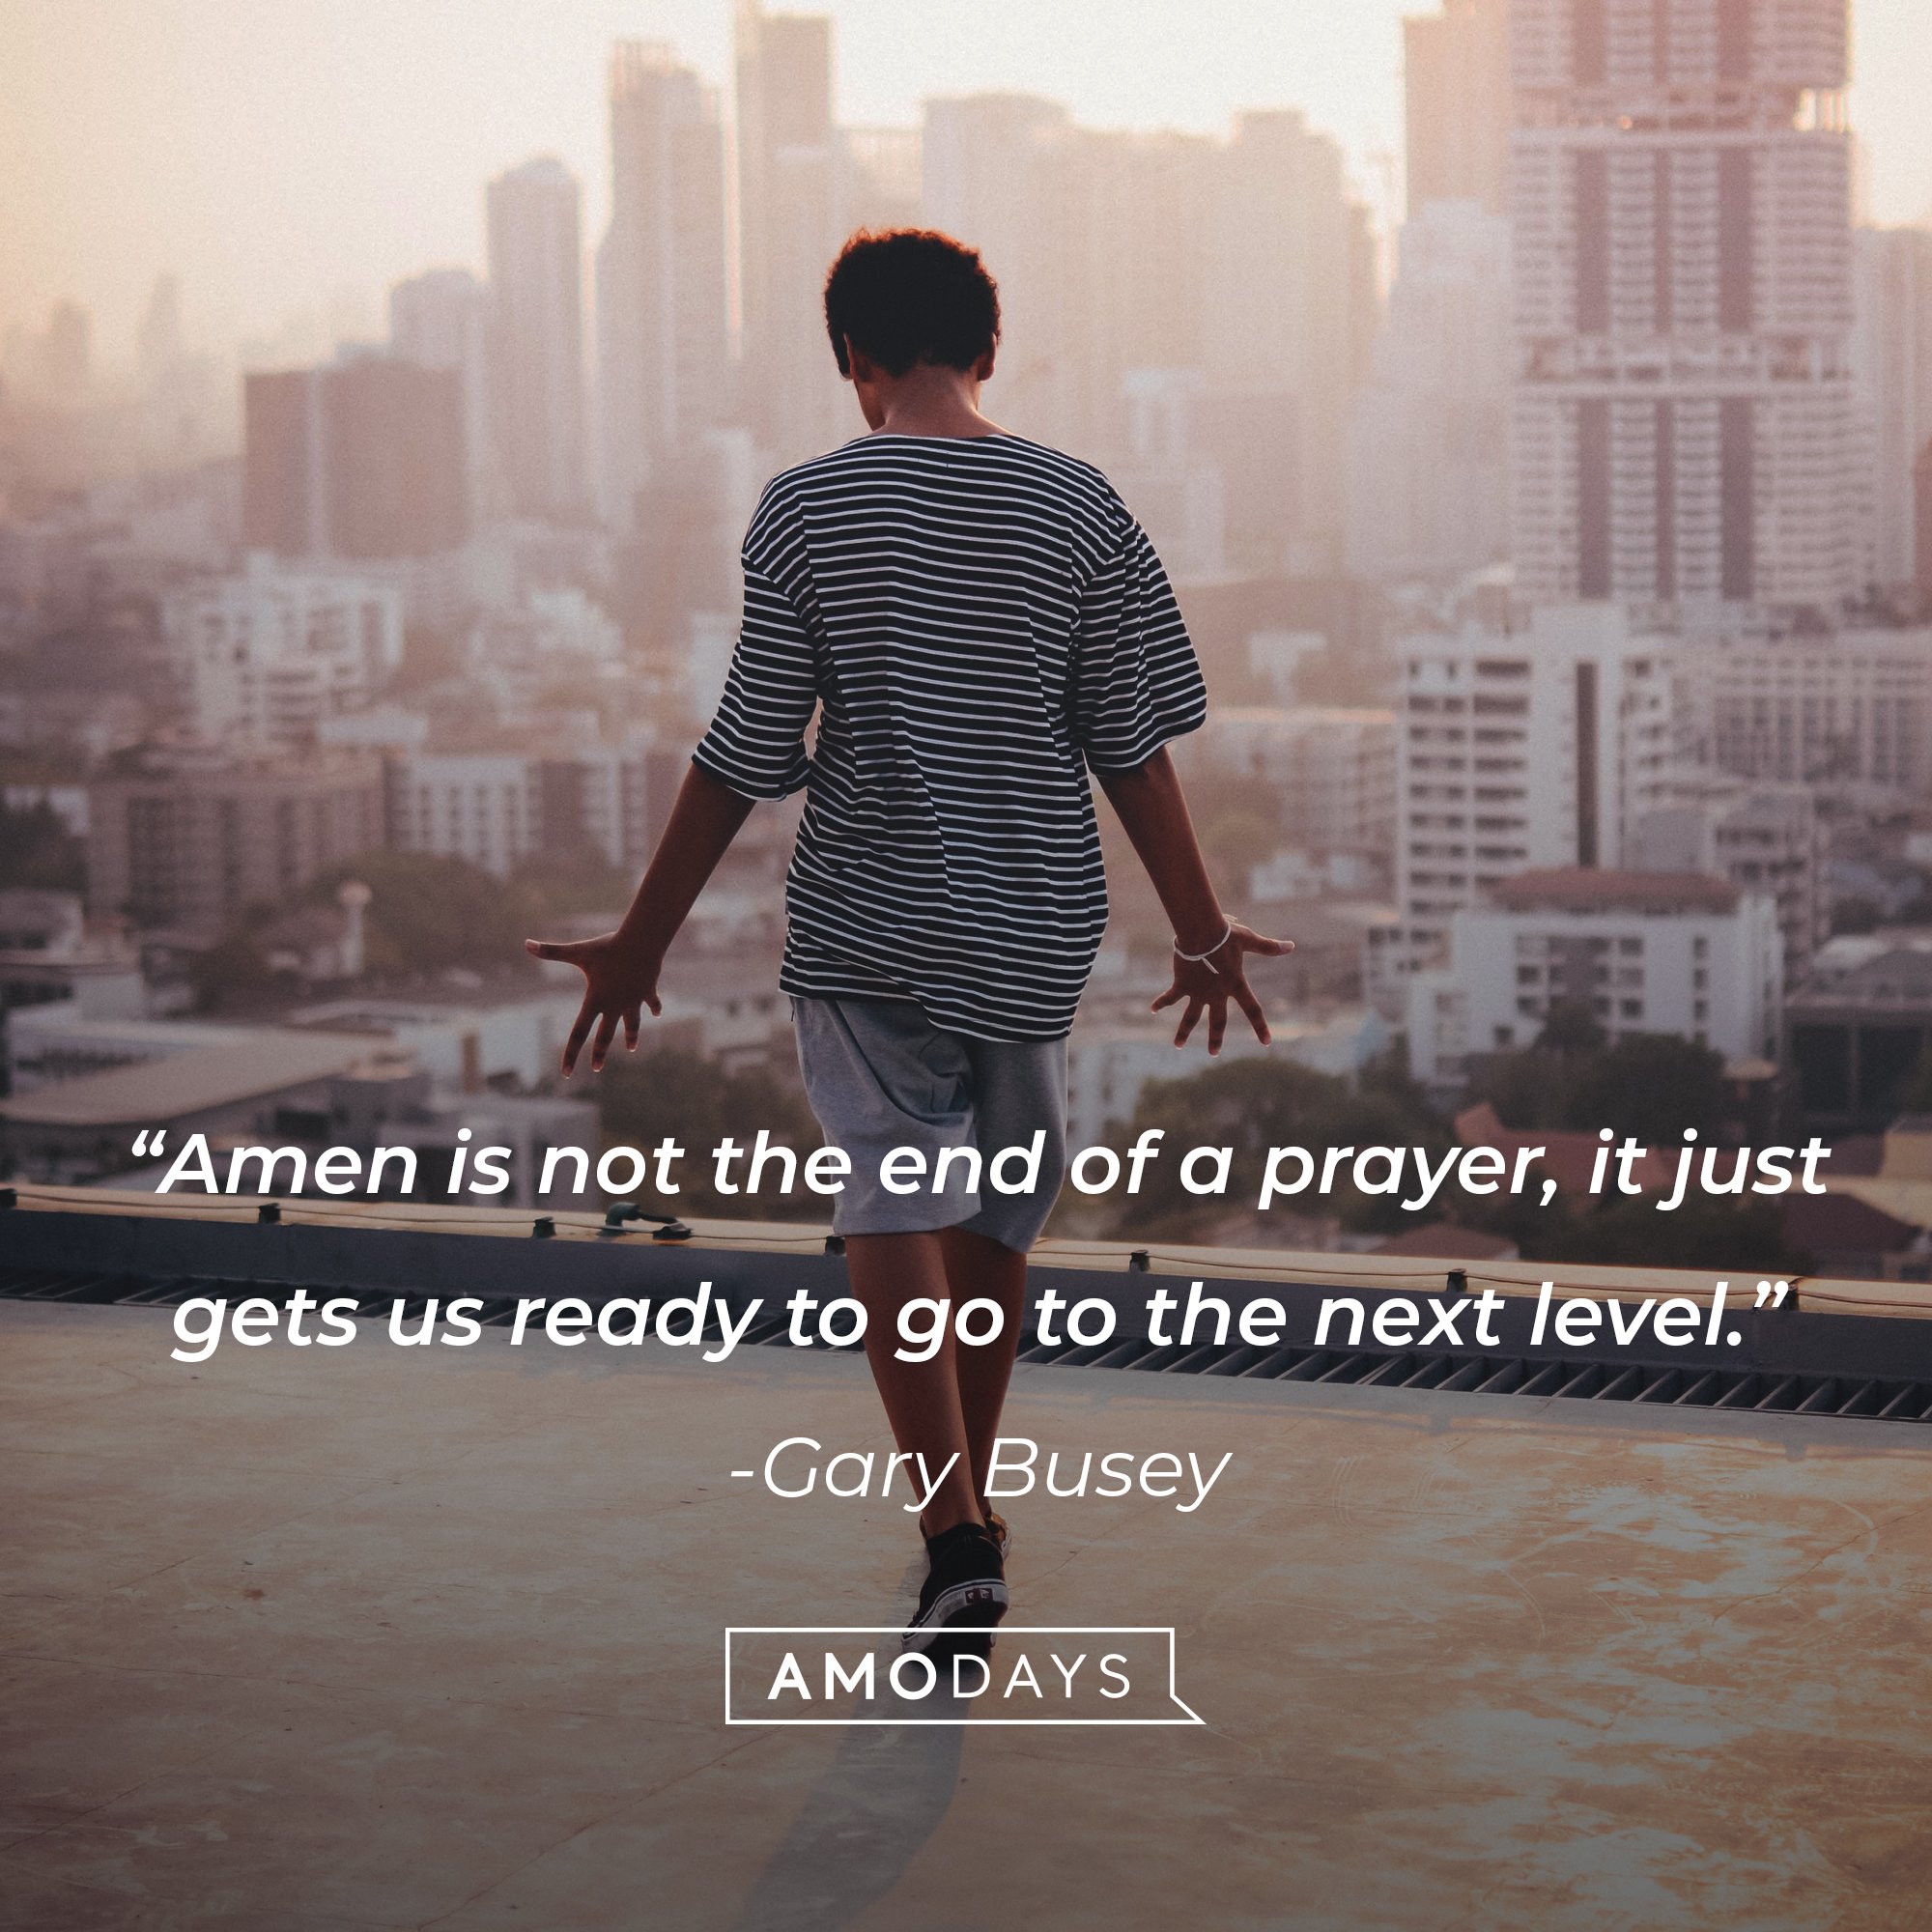 Gary Busey 's quote: “Amen is not the end of a prayer, it just gets us ready to go to the next level.” | Image: AmoDays